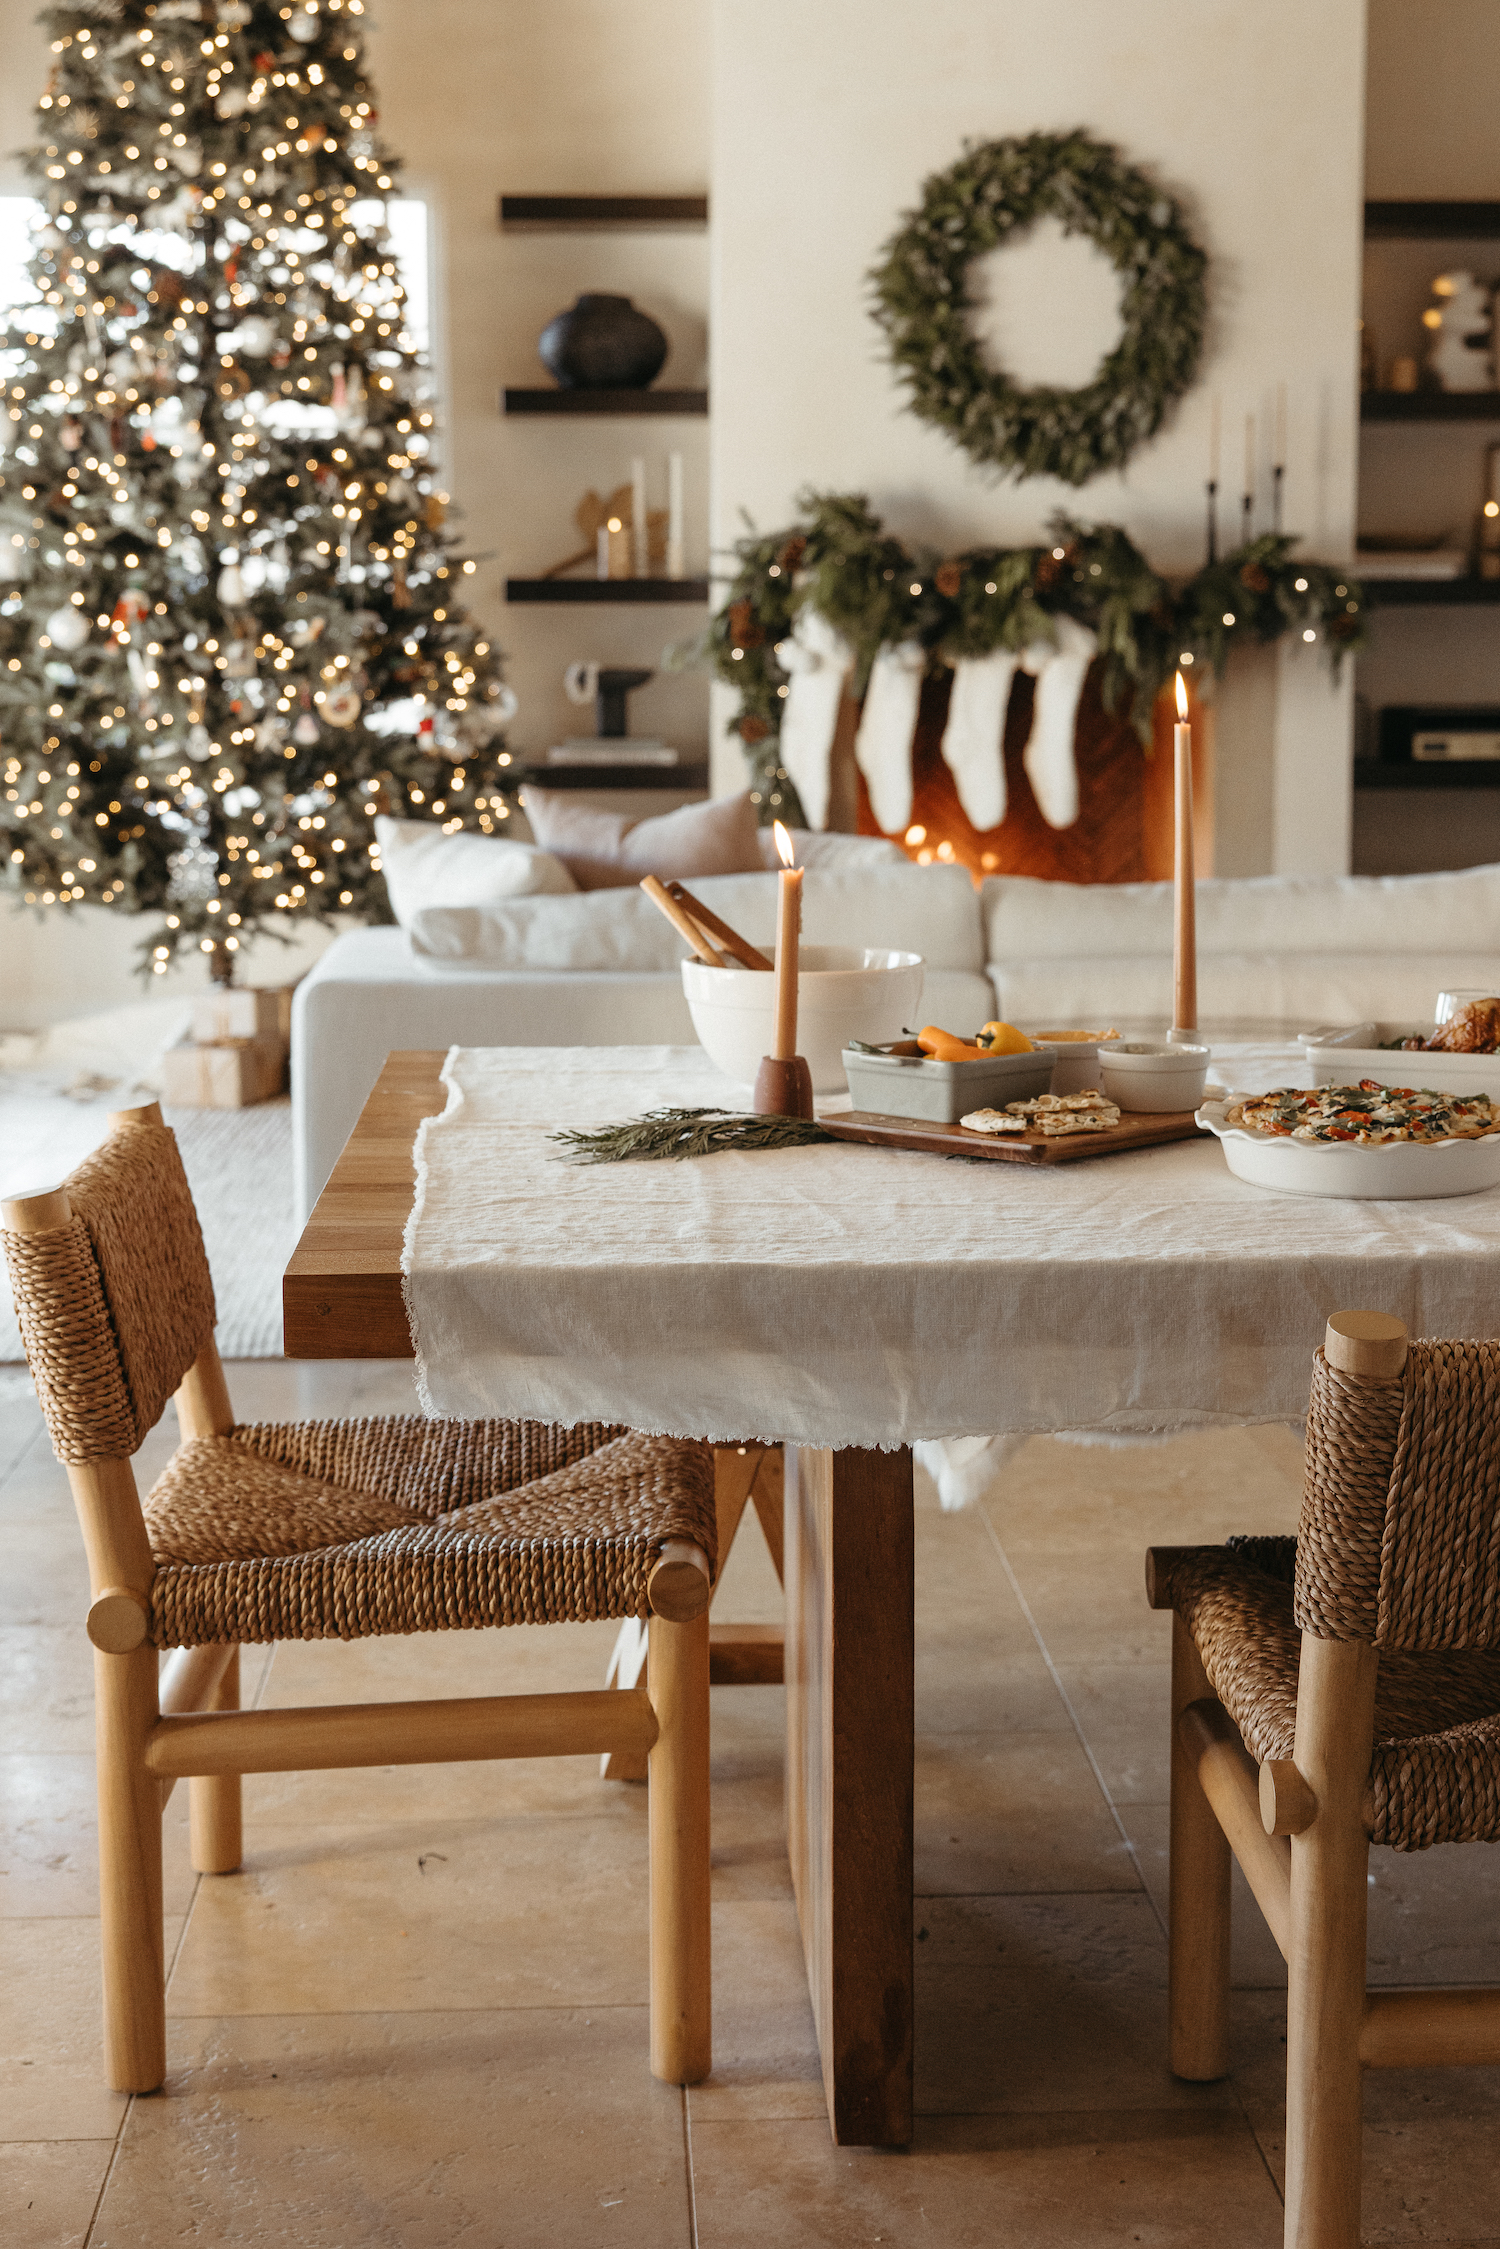 Camille Styles Holiday Decor 2023 - holiday table with evergreen runner